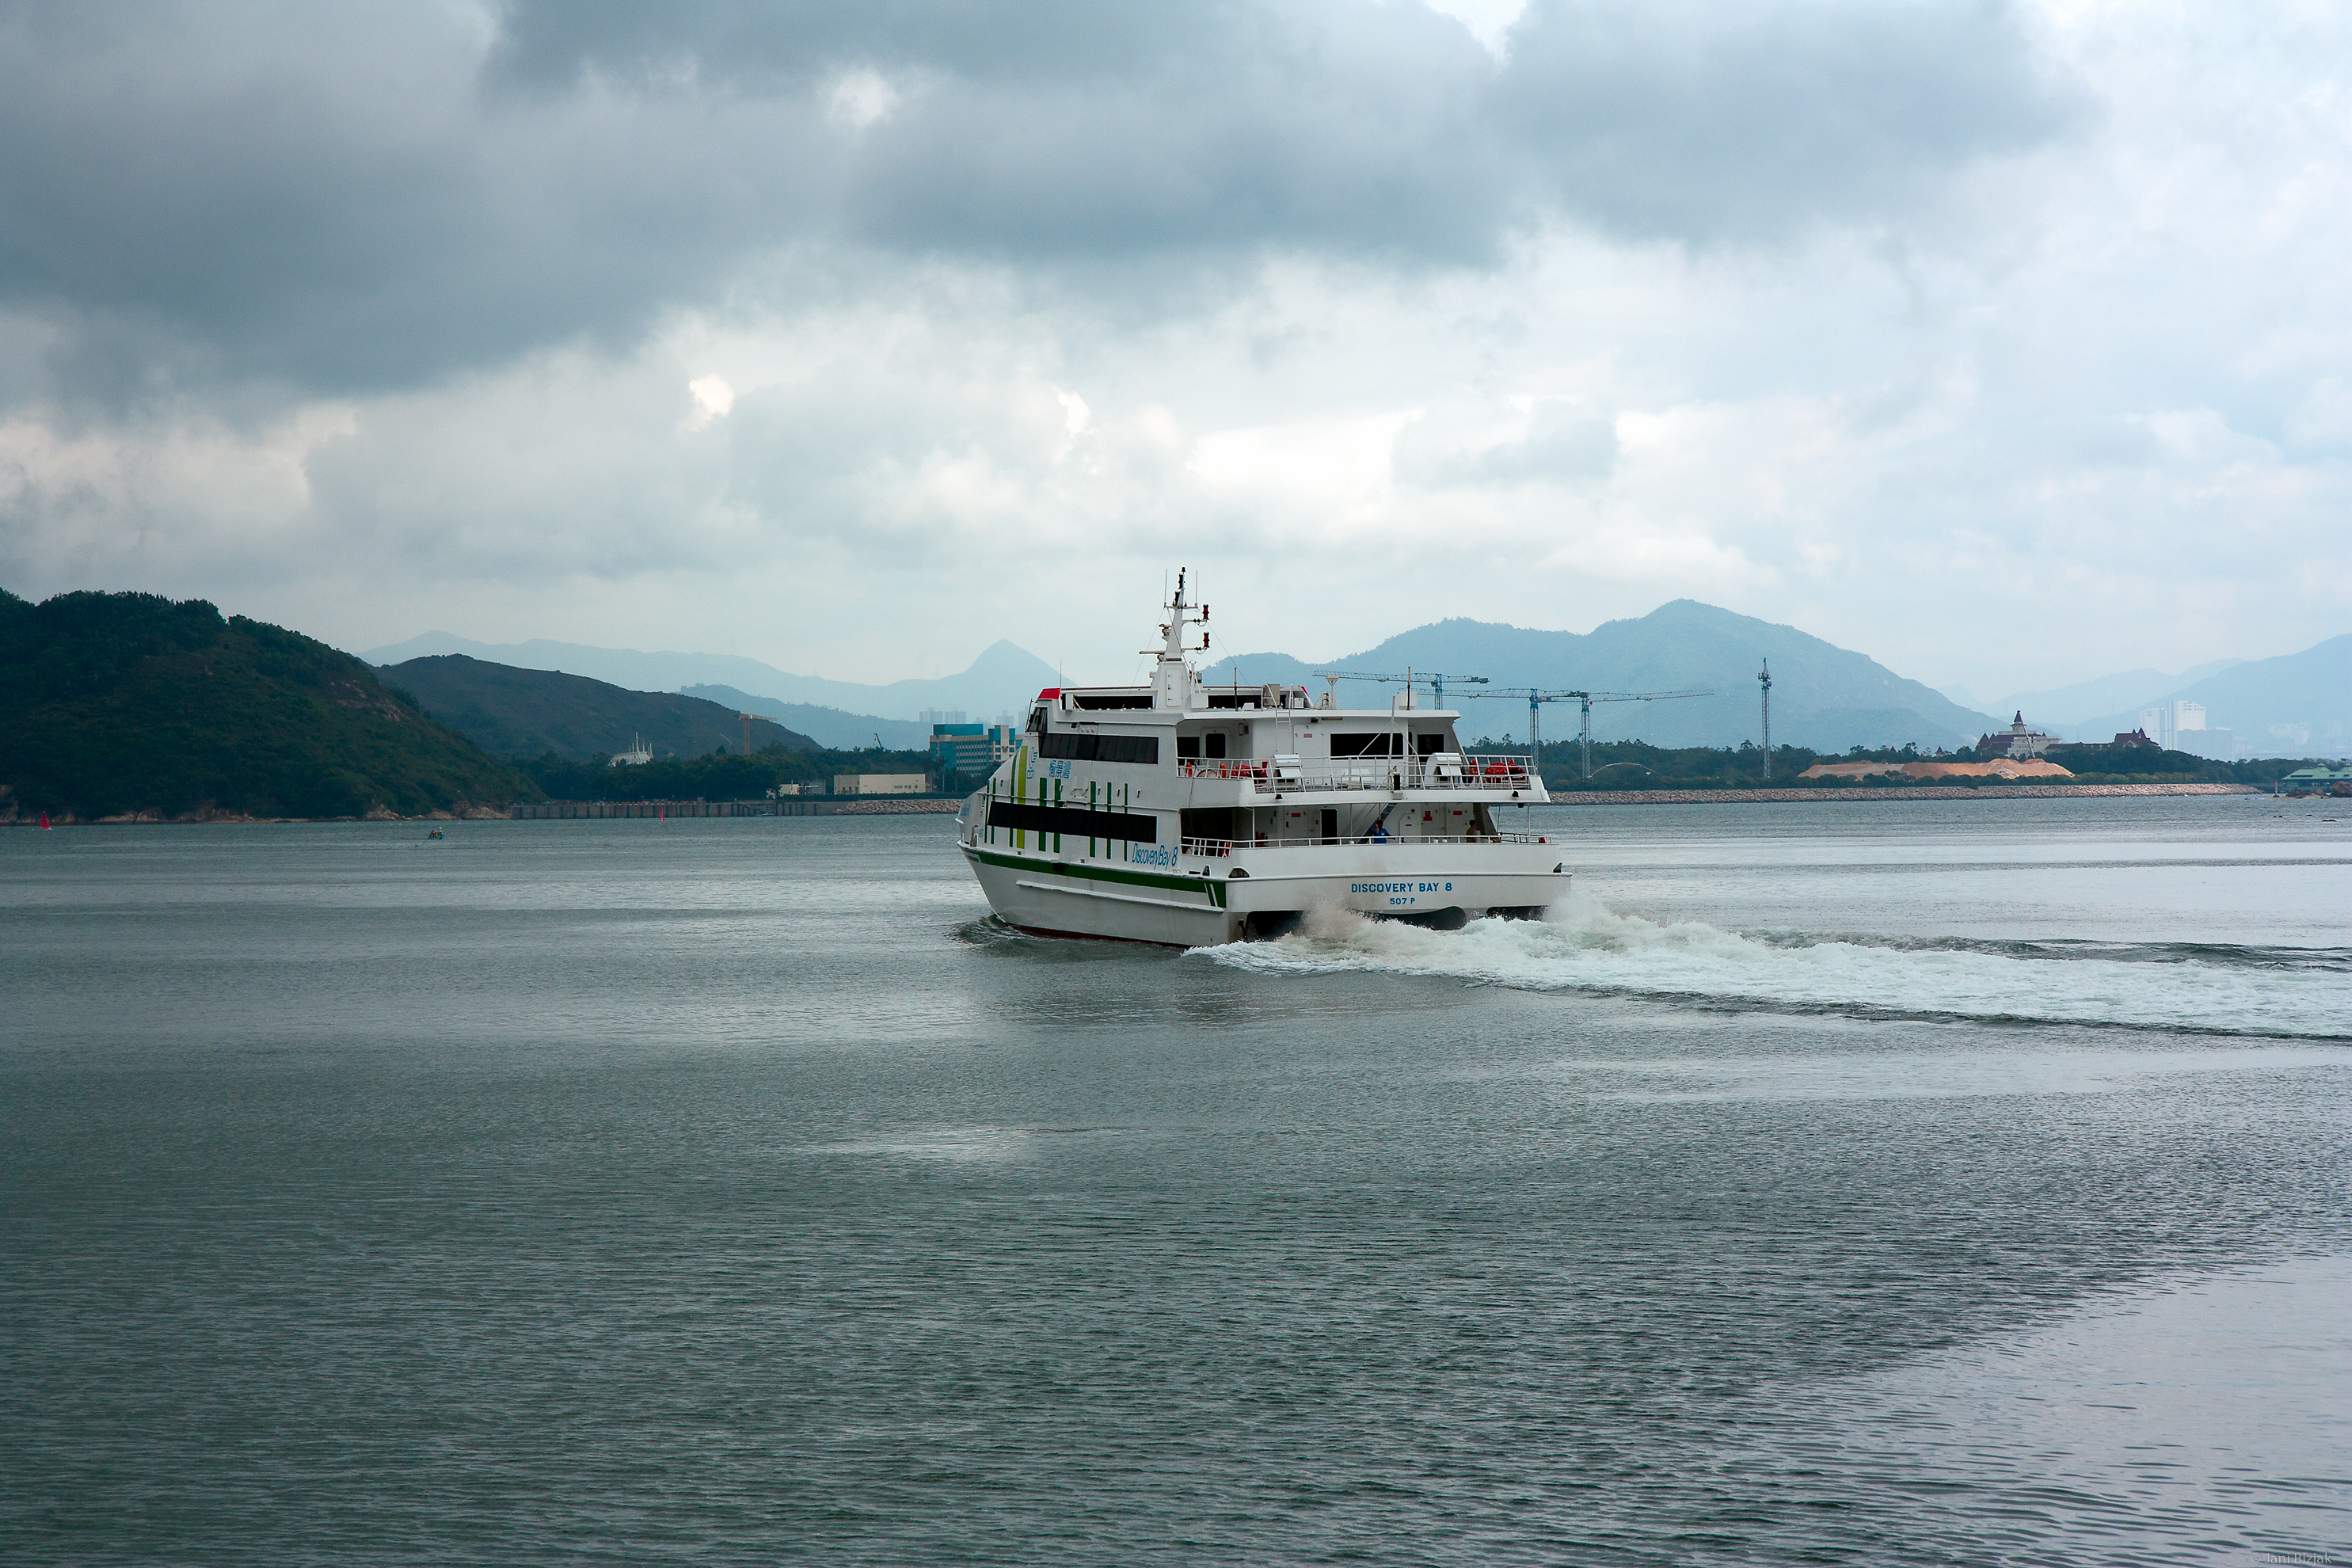 Ferries are the main means of transport from islands to mainland.